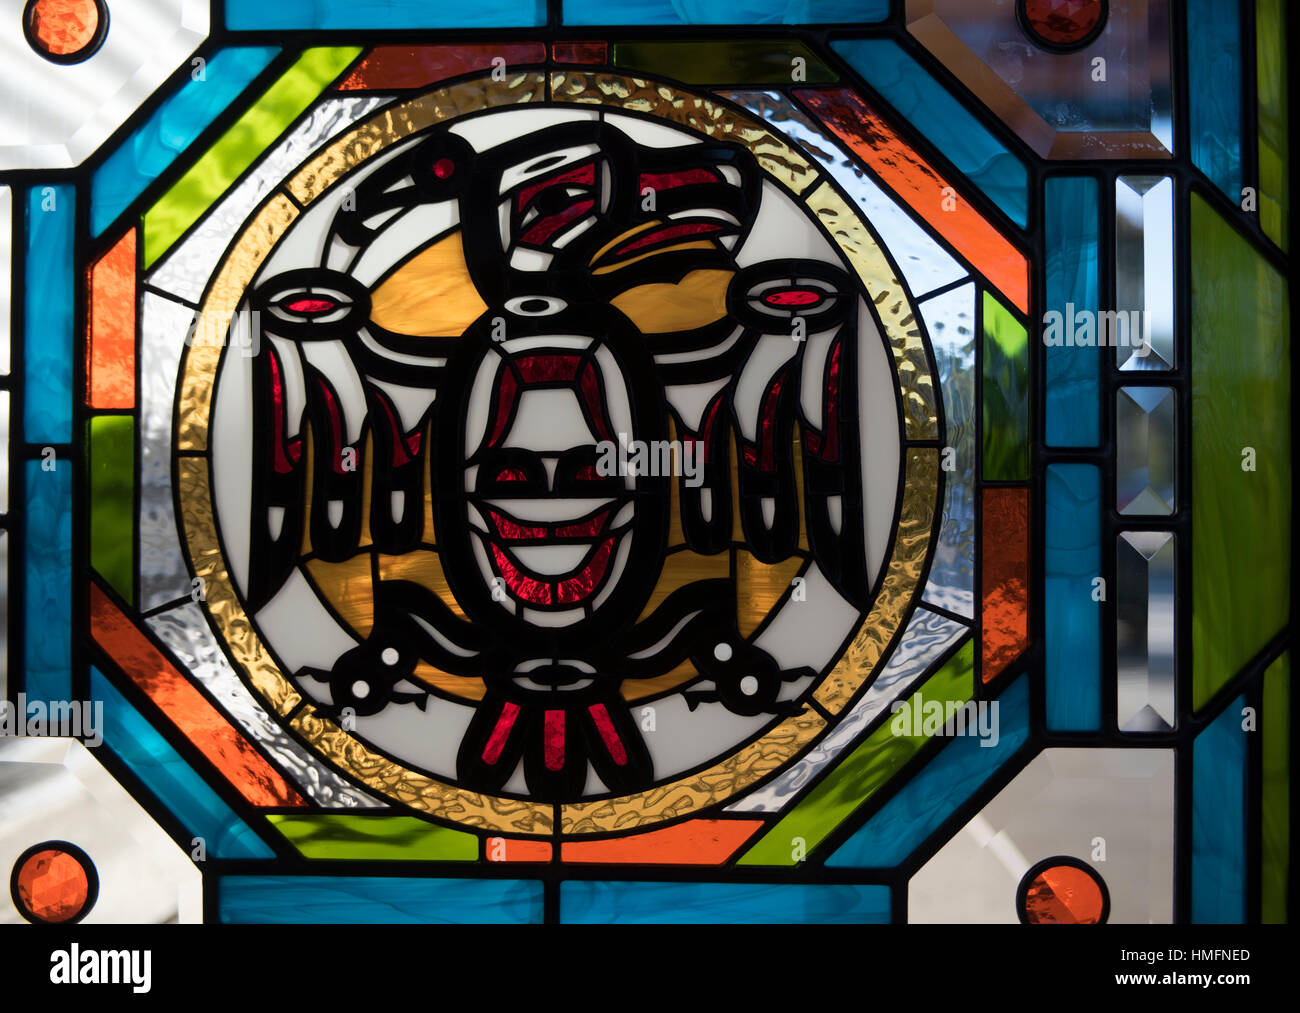 Stained glass panels in the Comox Valley civilian passing airport on Vancouver Island, BC. Canada. Stock Photo